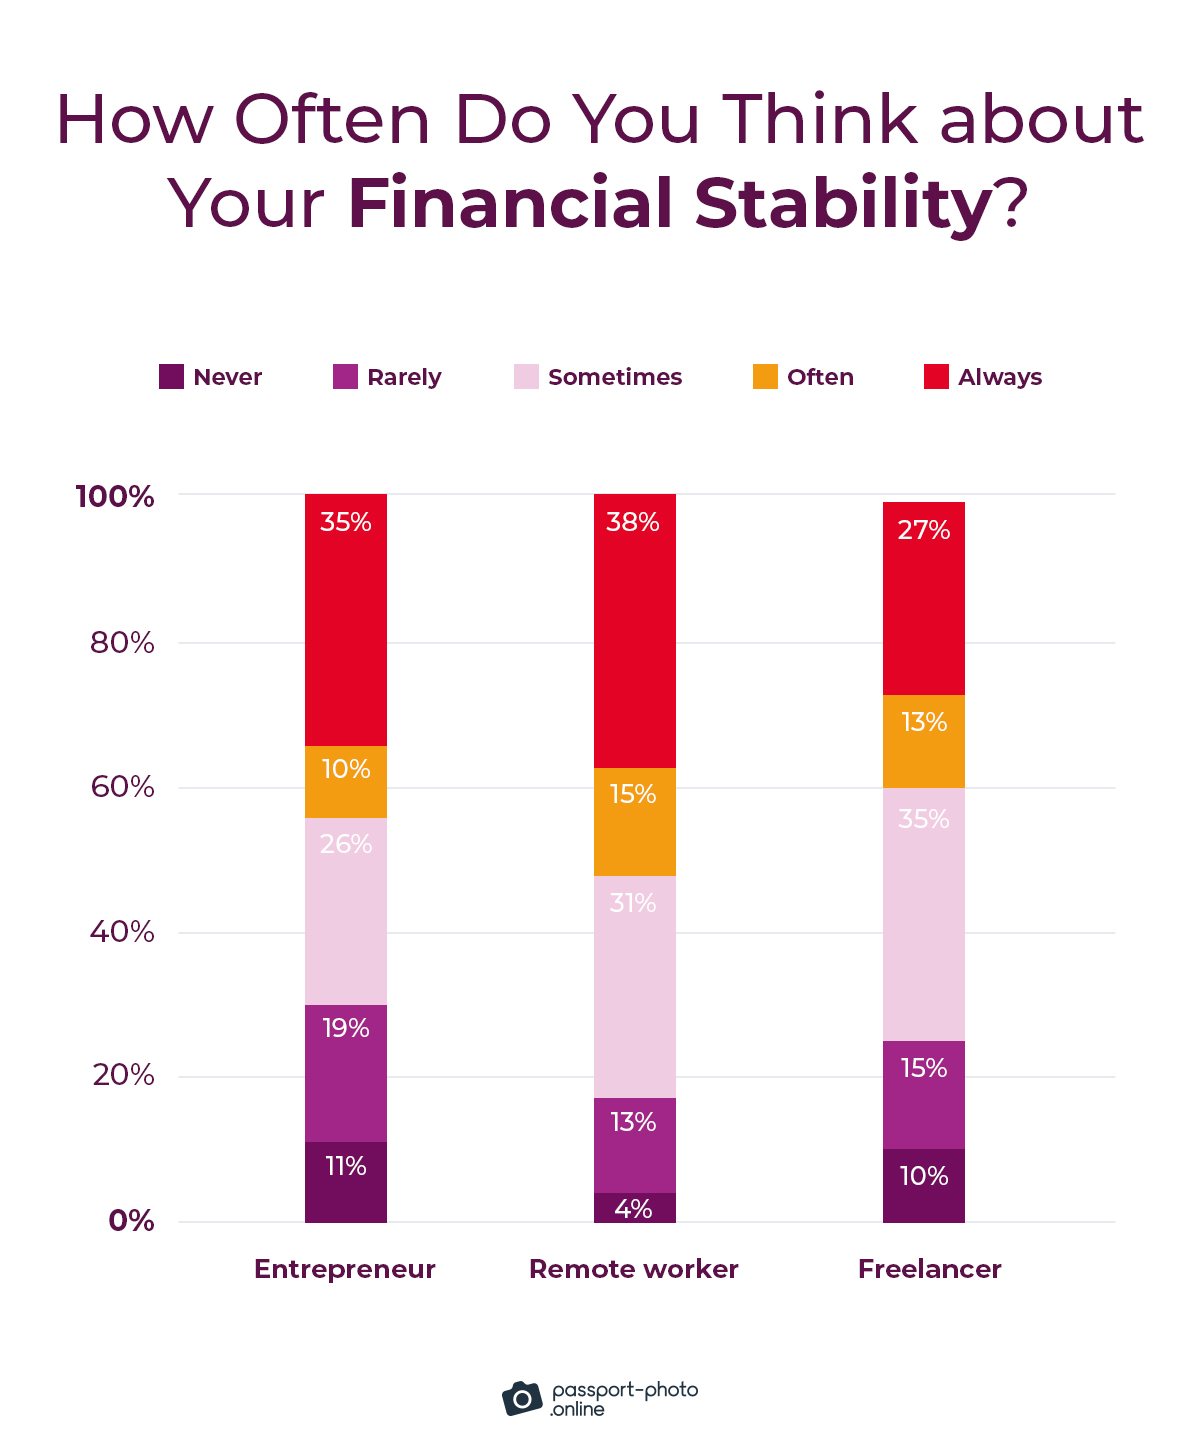 77% of digital nomads generally think about their financial stability